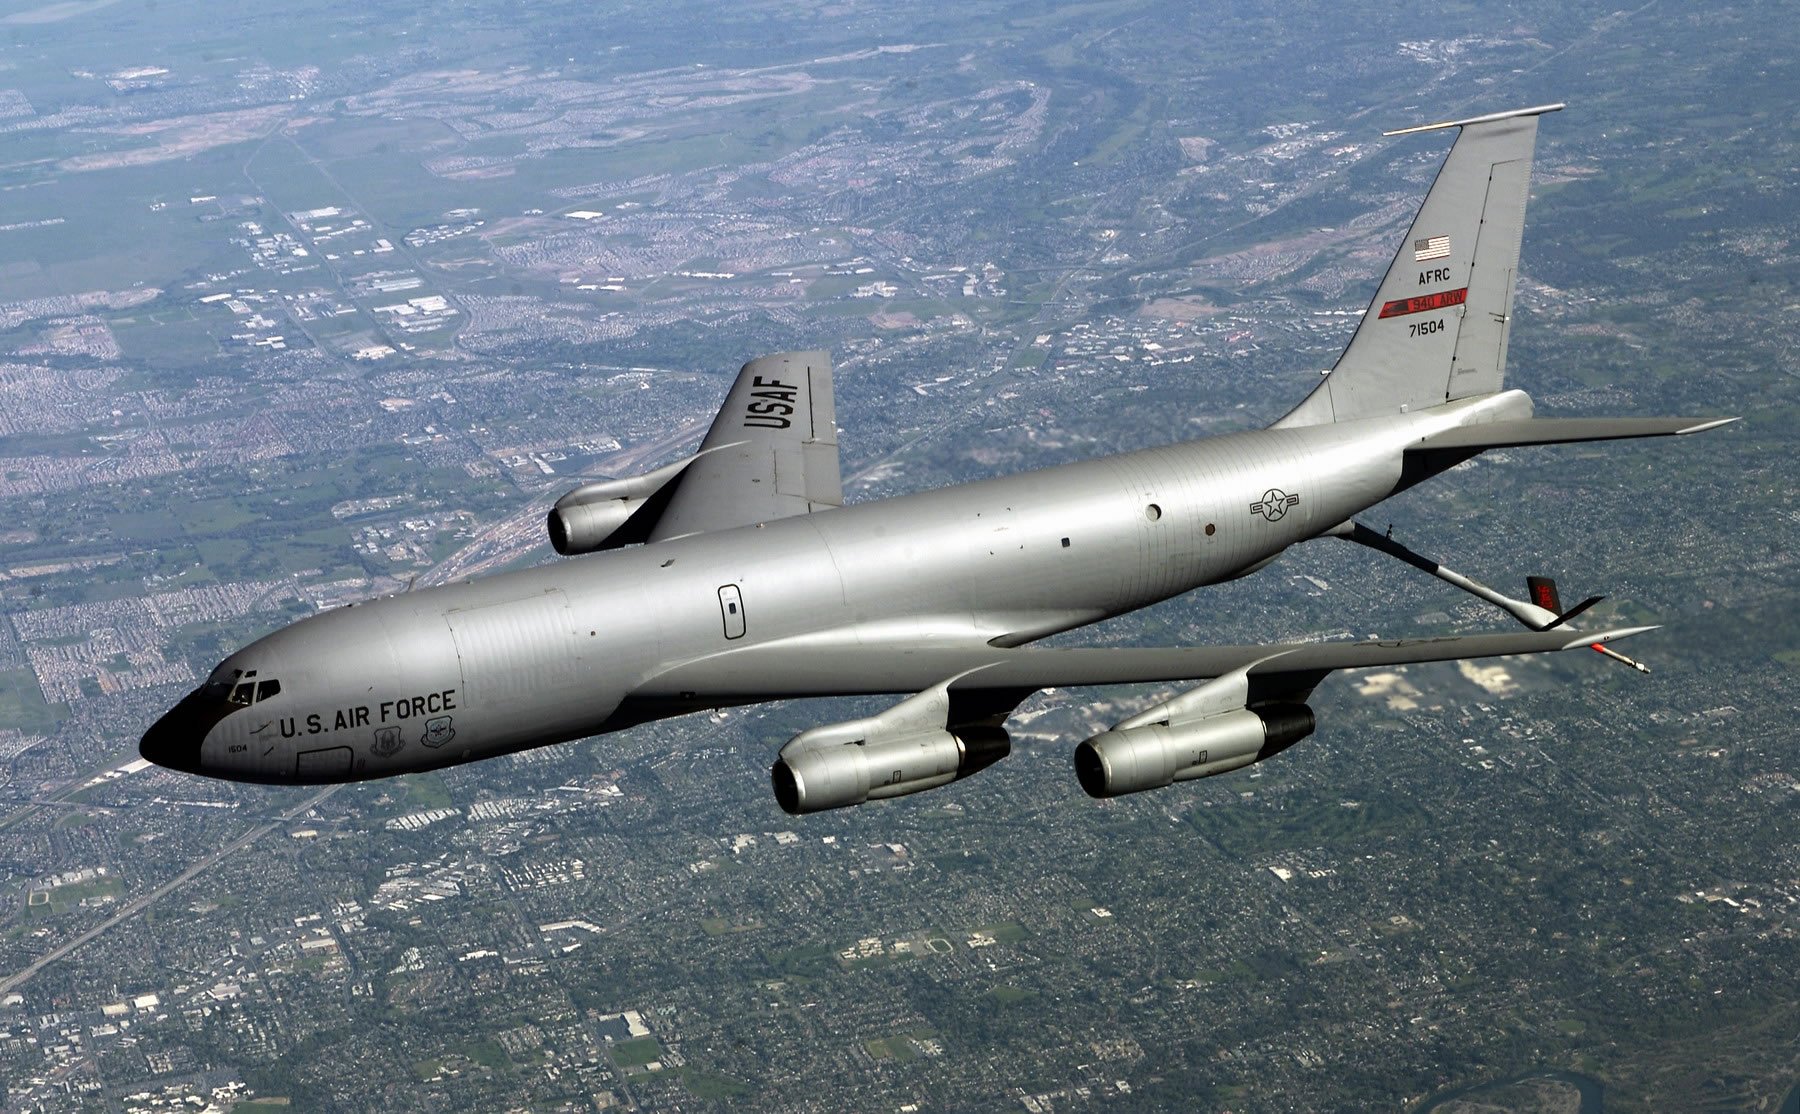 1967, Boeing, Kc 135, Stratotanker, Aircrafts, Ravitailleur, Military, Us air force Wallpaper